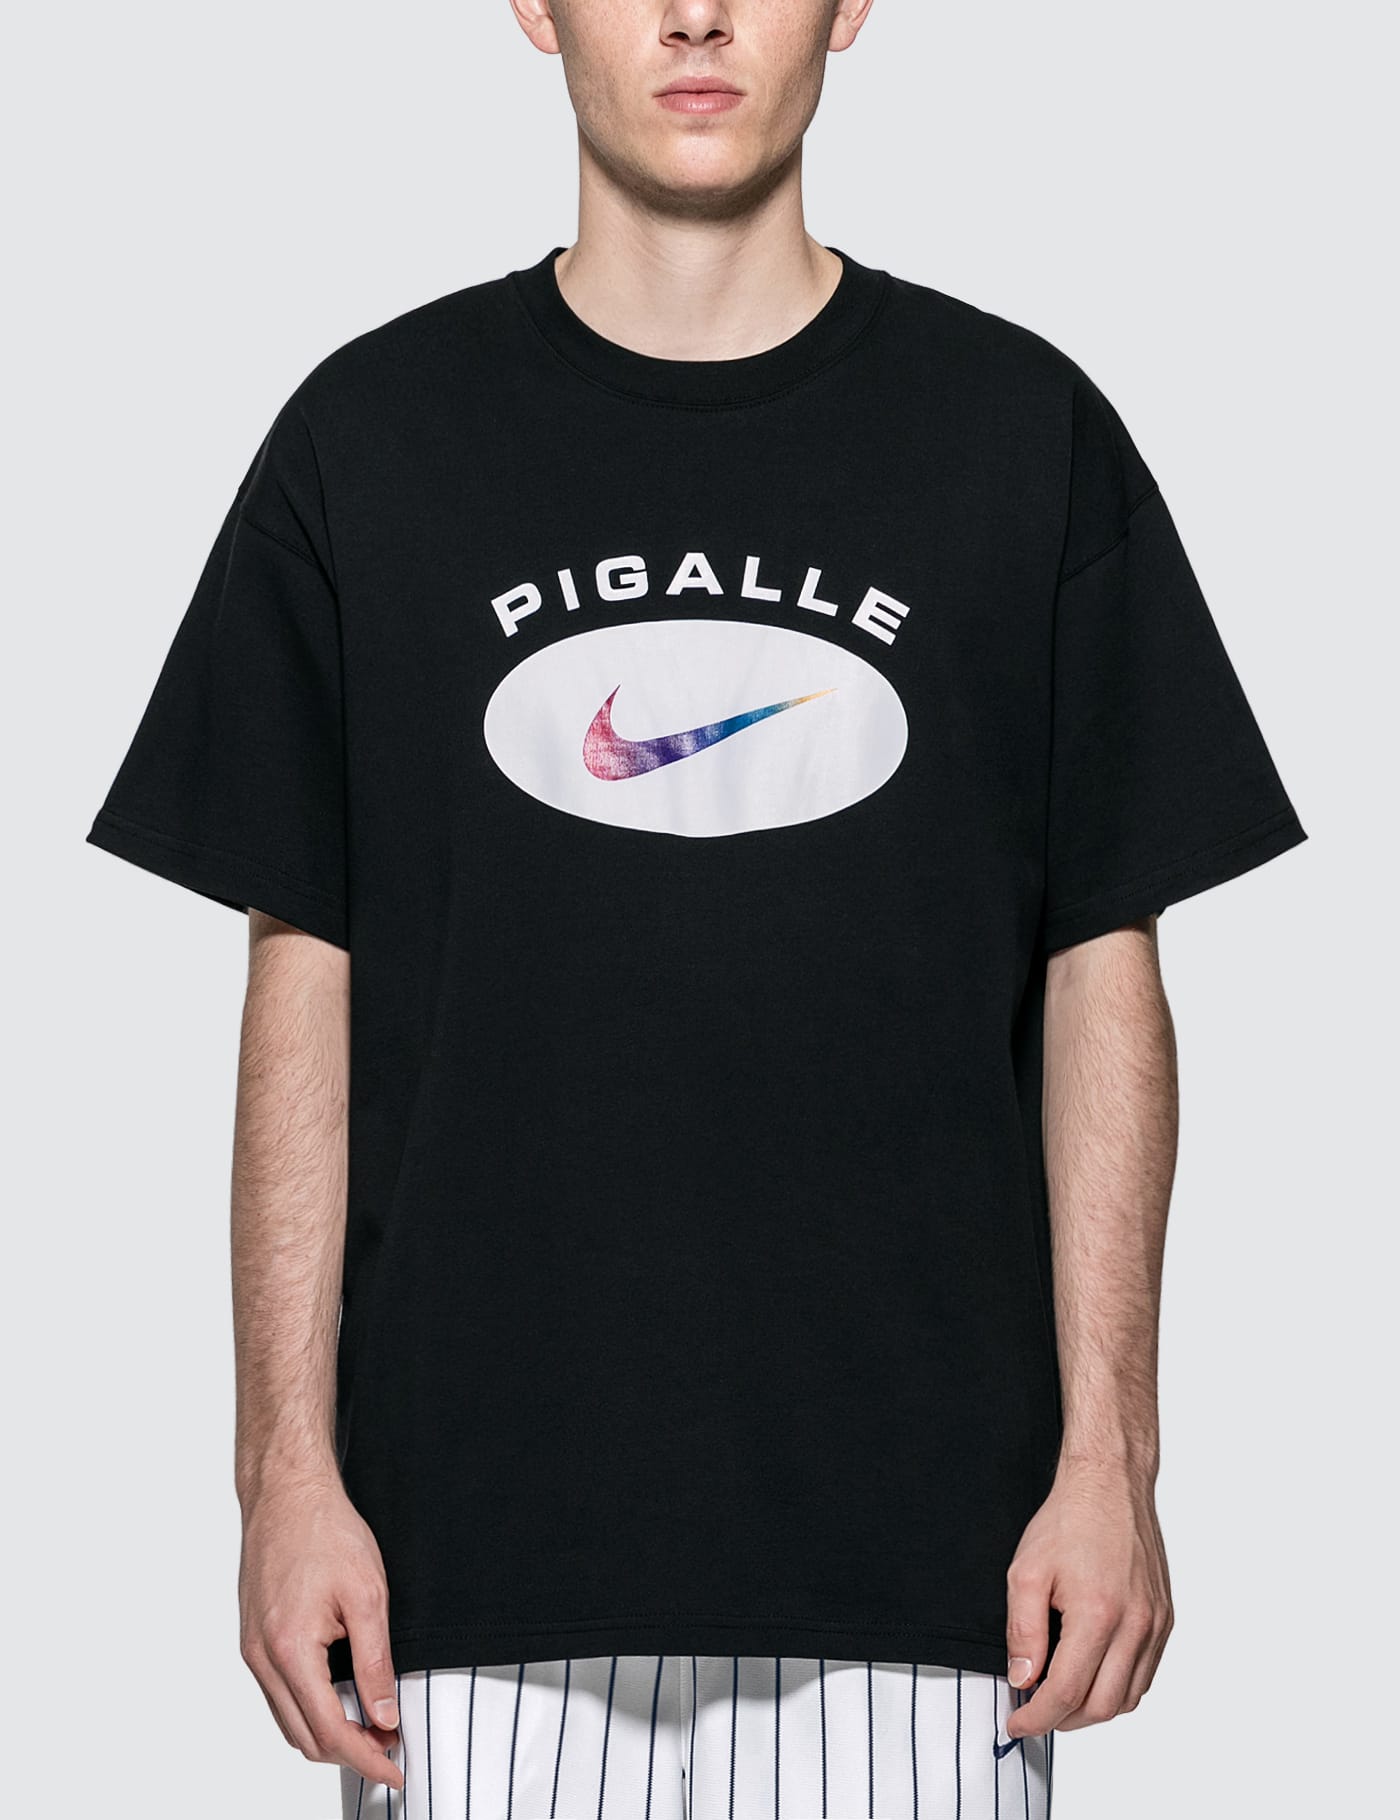 pigalle t shirt